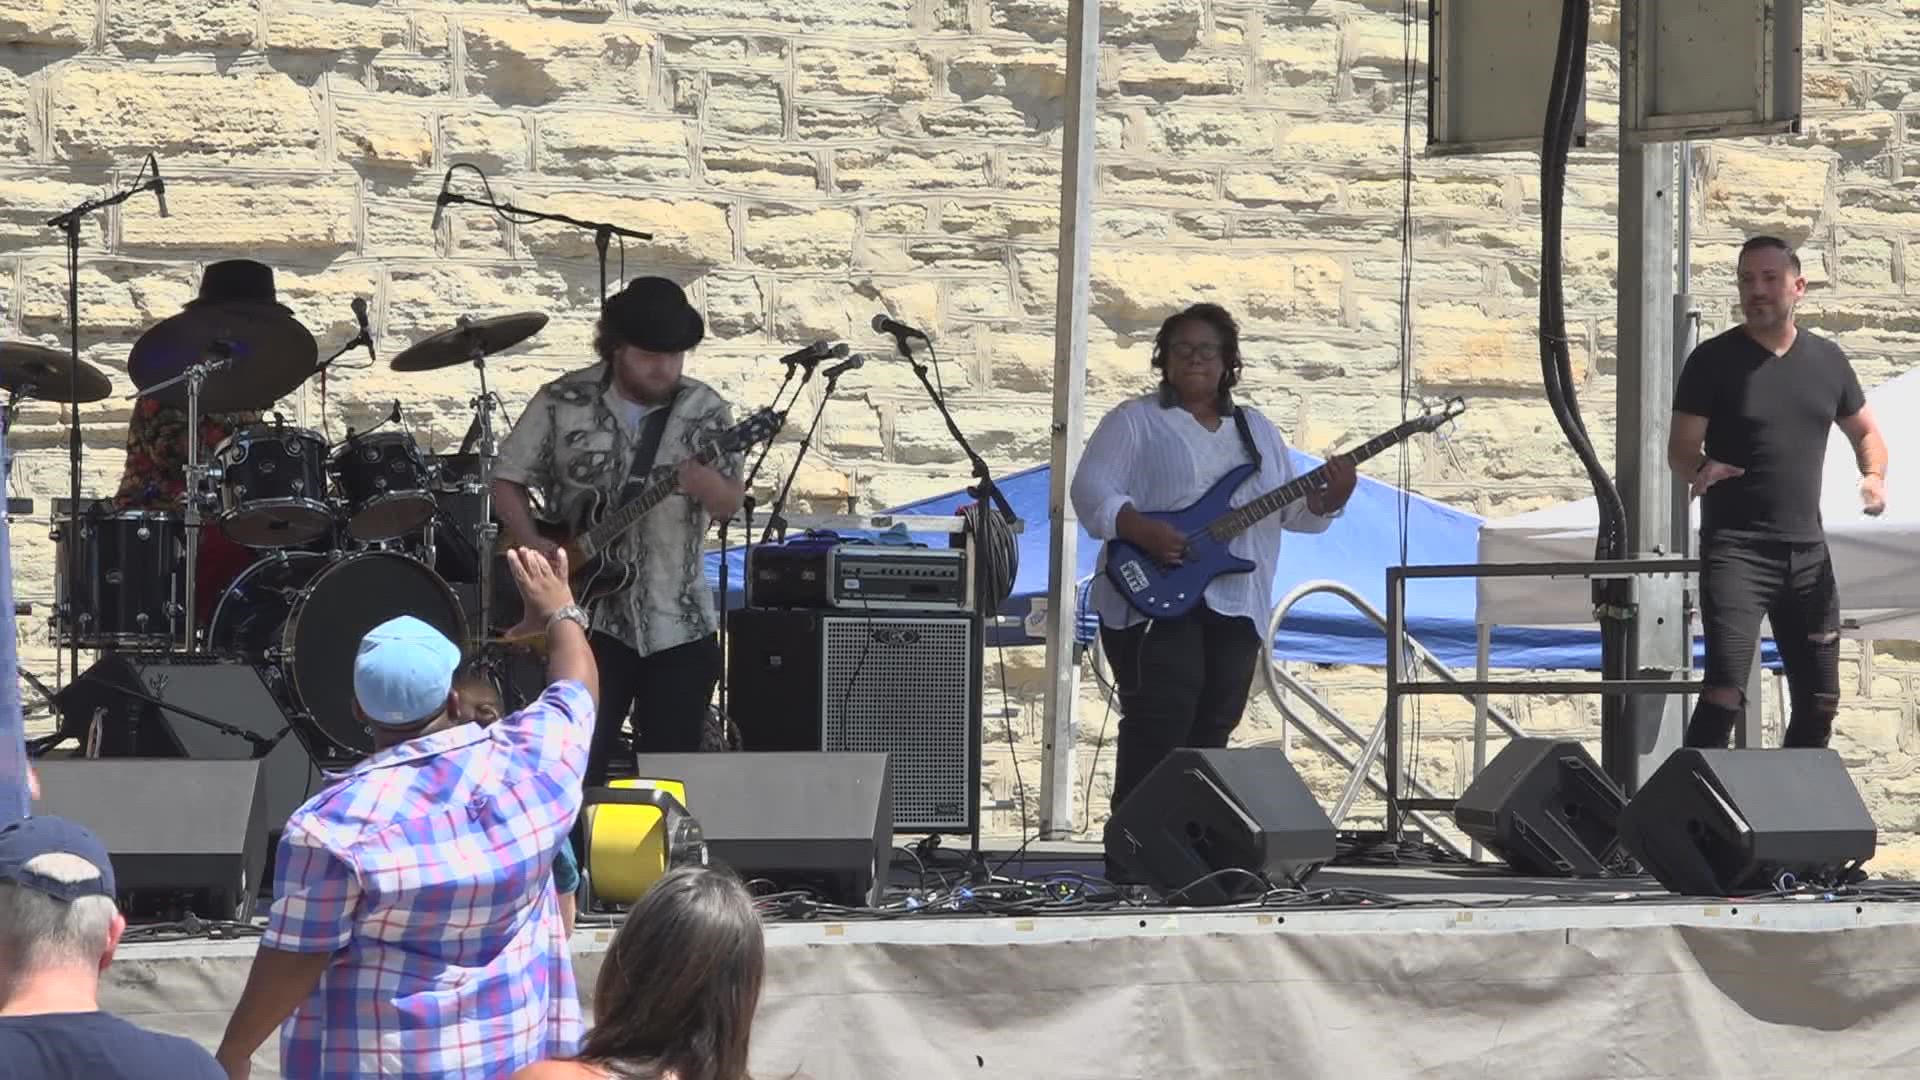 The Blues at the Arch Festival returned to downtown this weekend after a two-year hiatus due to the pandemic. This year they packed the festival into one weekend.